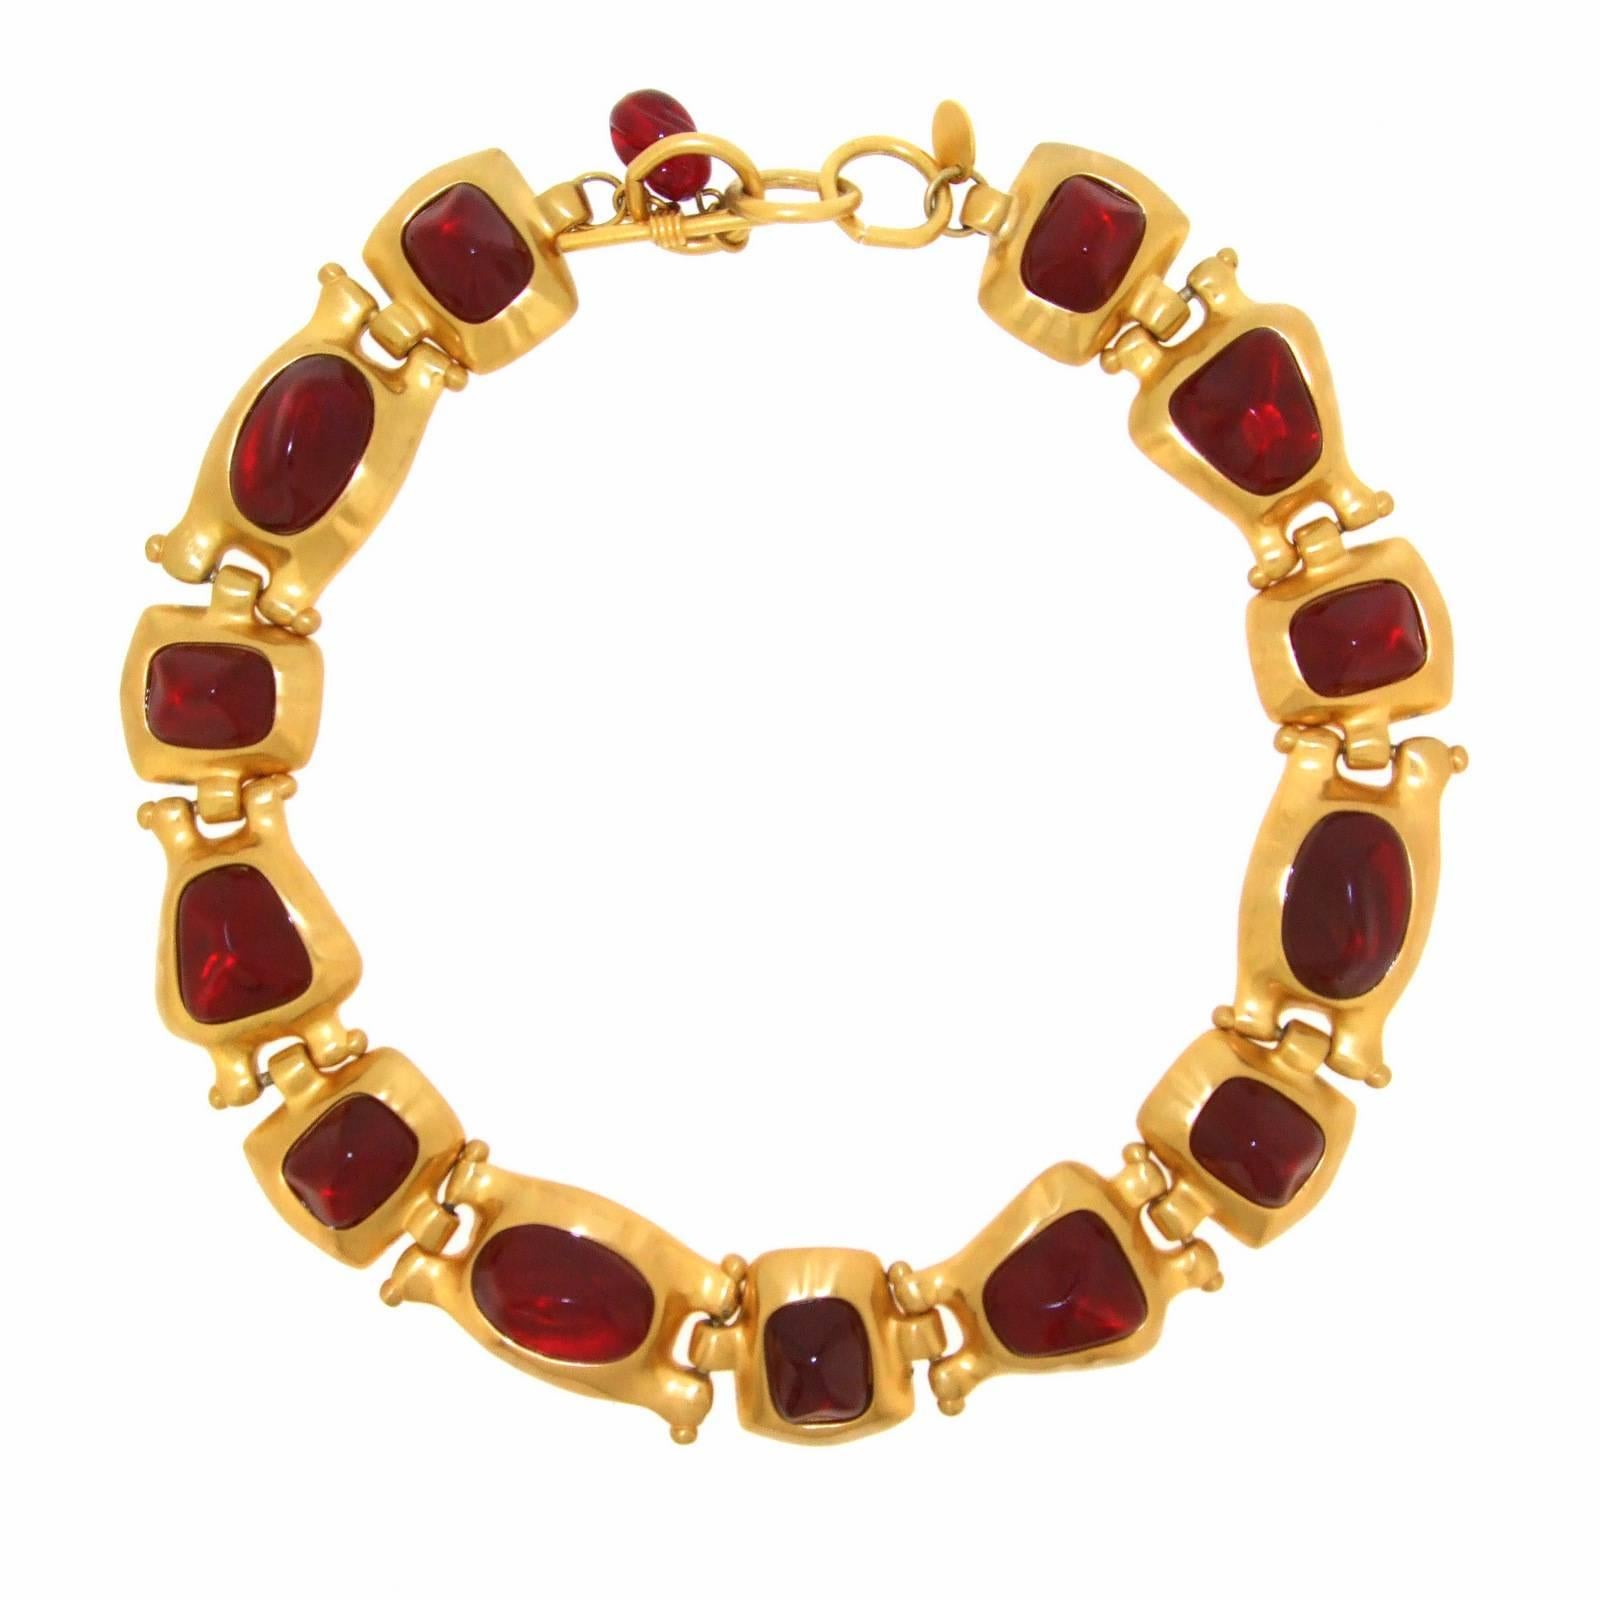 Baroque Revival Anne Klein Ruby Red Necklace For Sale